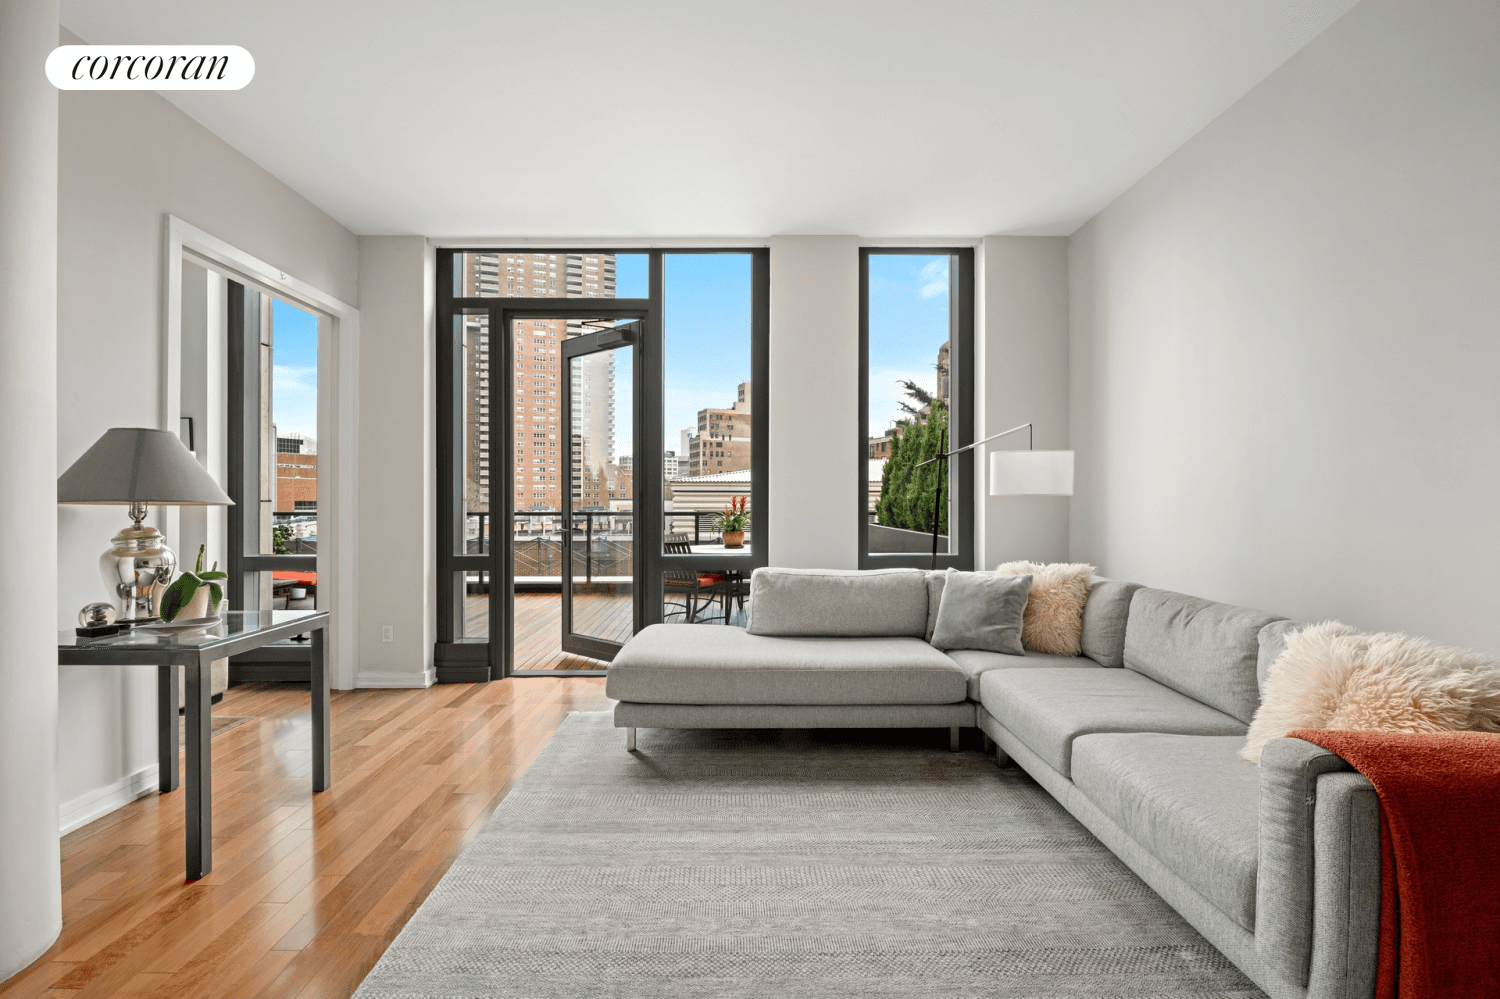 Townhouse like proportions meet luxury condominium convenience in this designer three bedroom, three bathroom duplex in one of Tribeca's most sought after full service buildings.